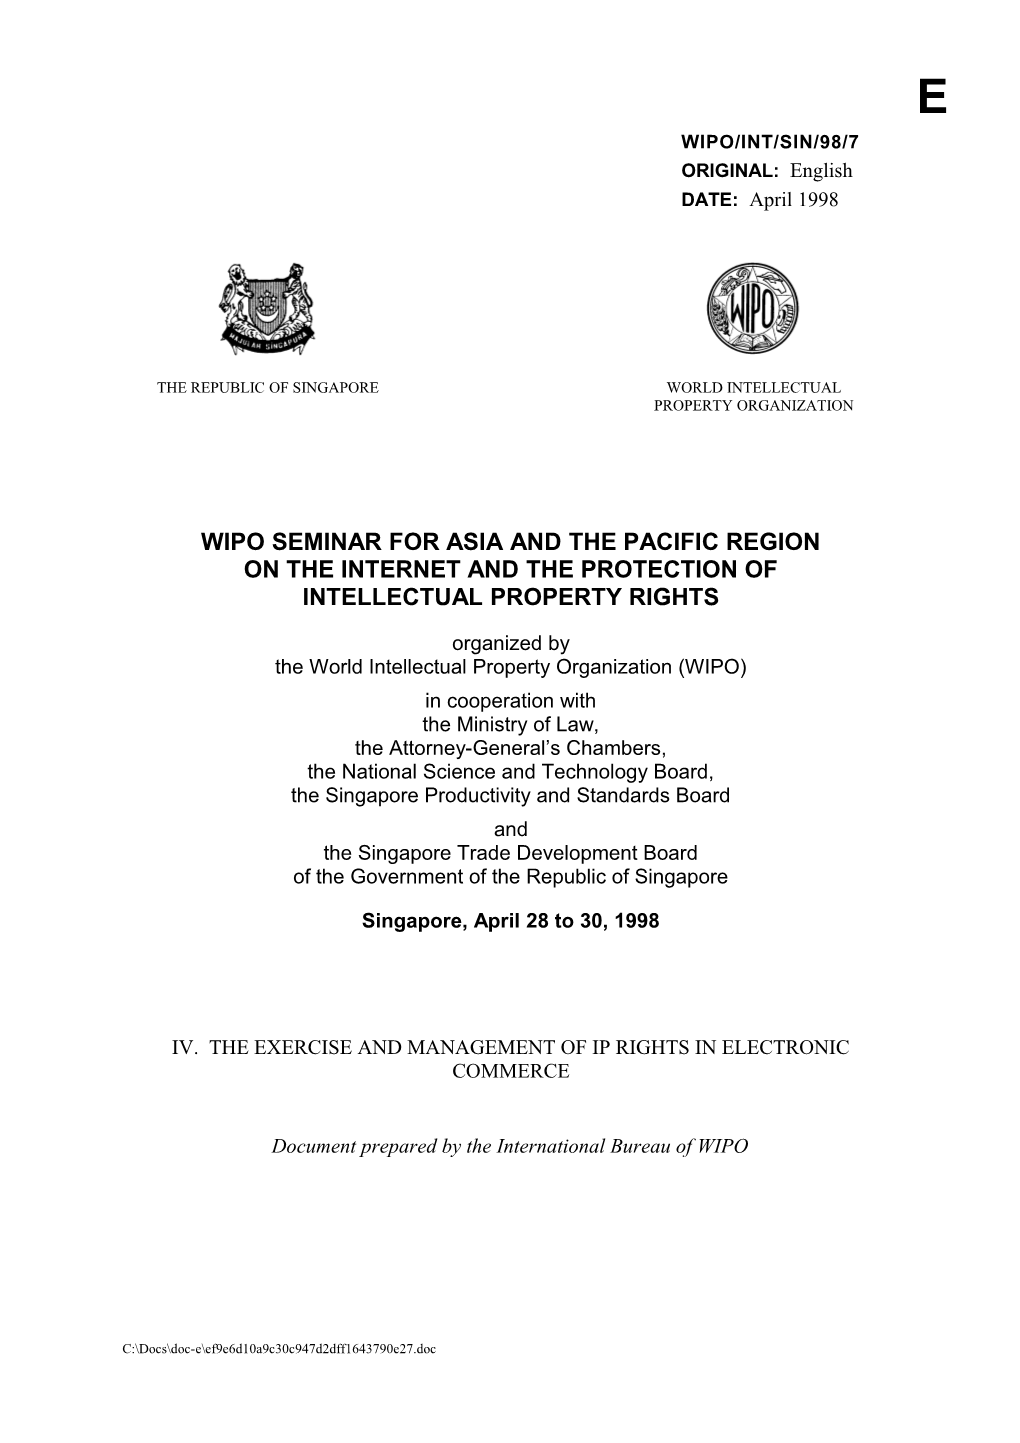 WIPO/INT/SIN/98/7: IV. the Exercise and Management of IP Rights in Electronic Commerce